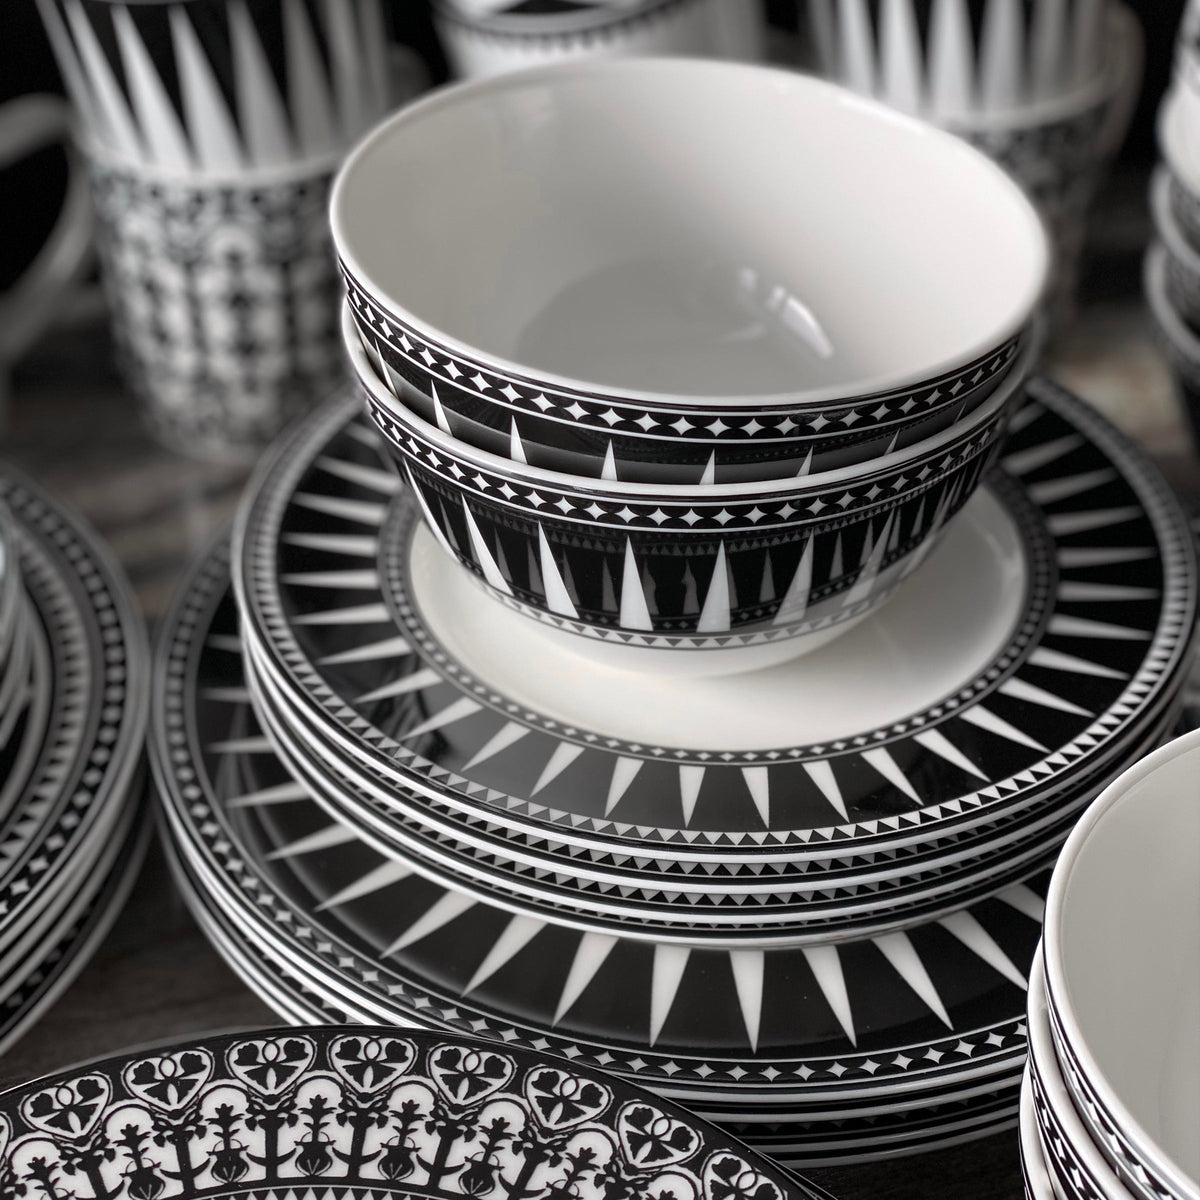 The Caskata Artisanal Home Marrakech Salad Plate, inspired by the vibrant patterns of Marrakech, features an elegant set of black and white dishes displayed on a table.